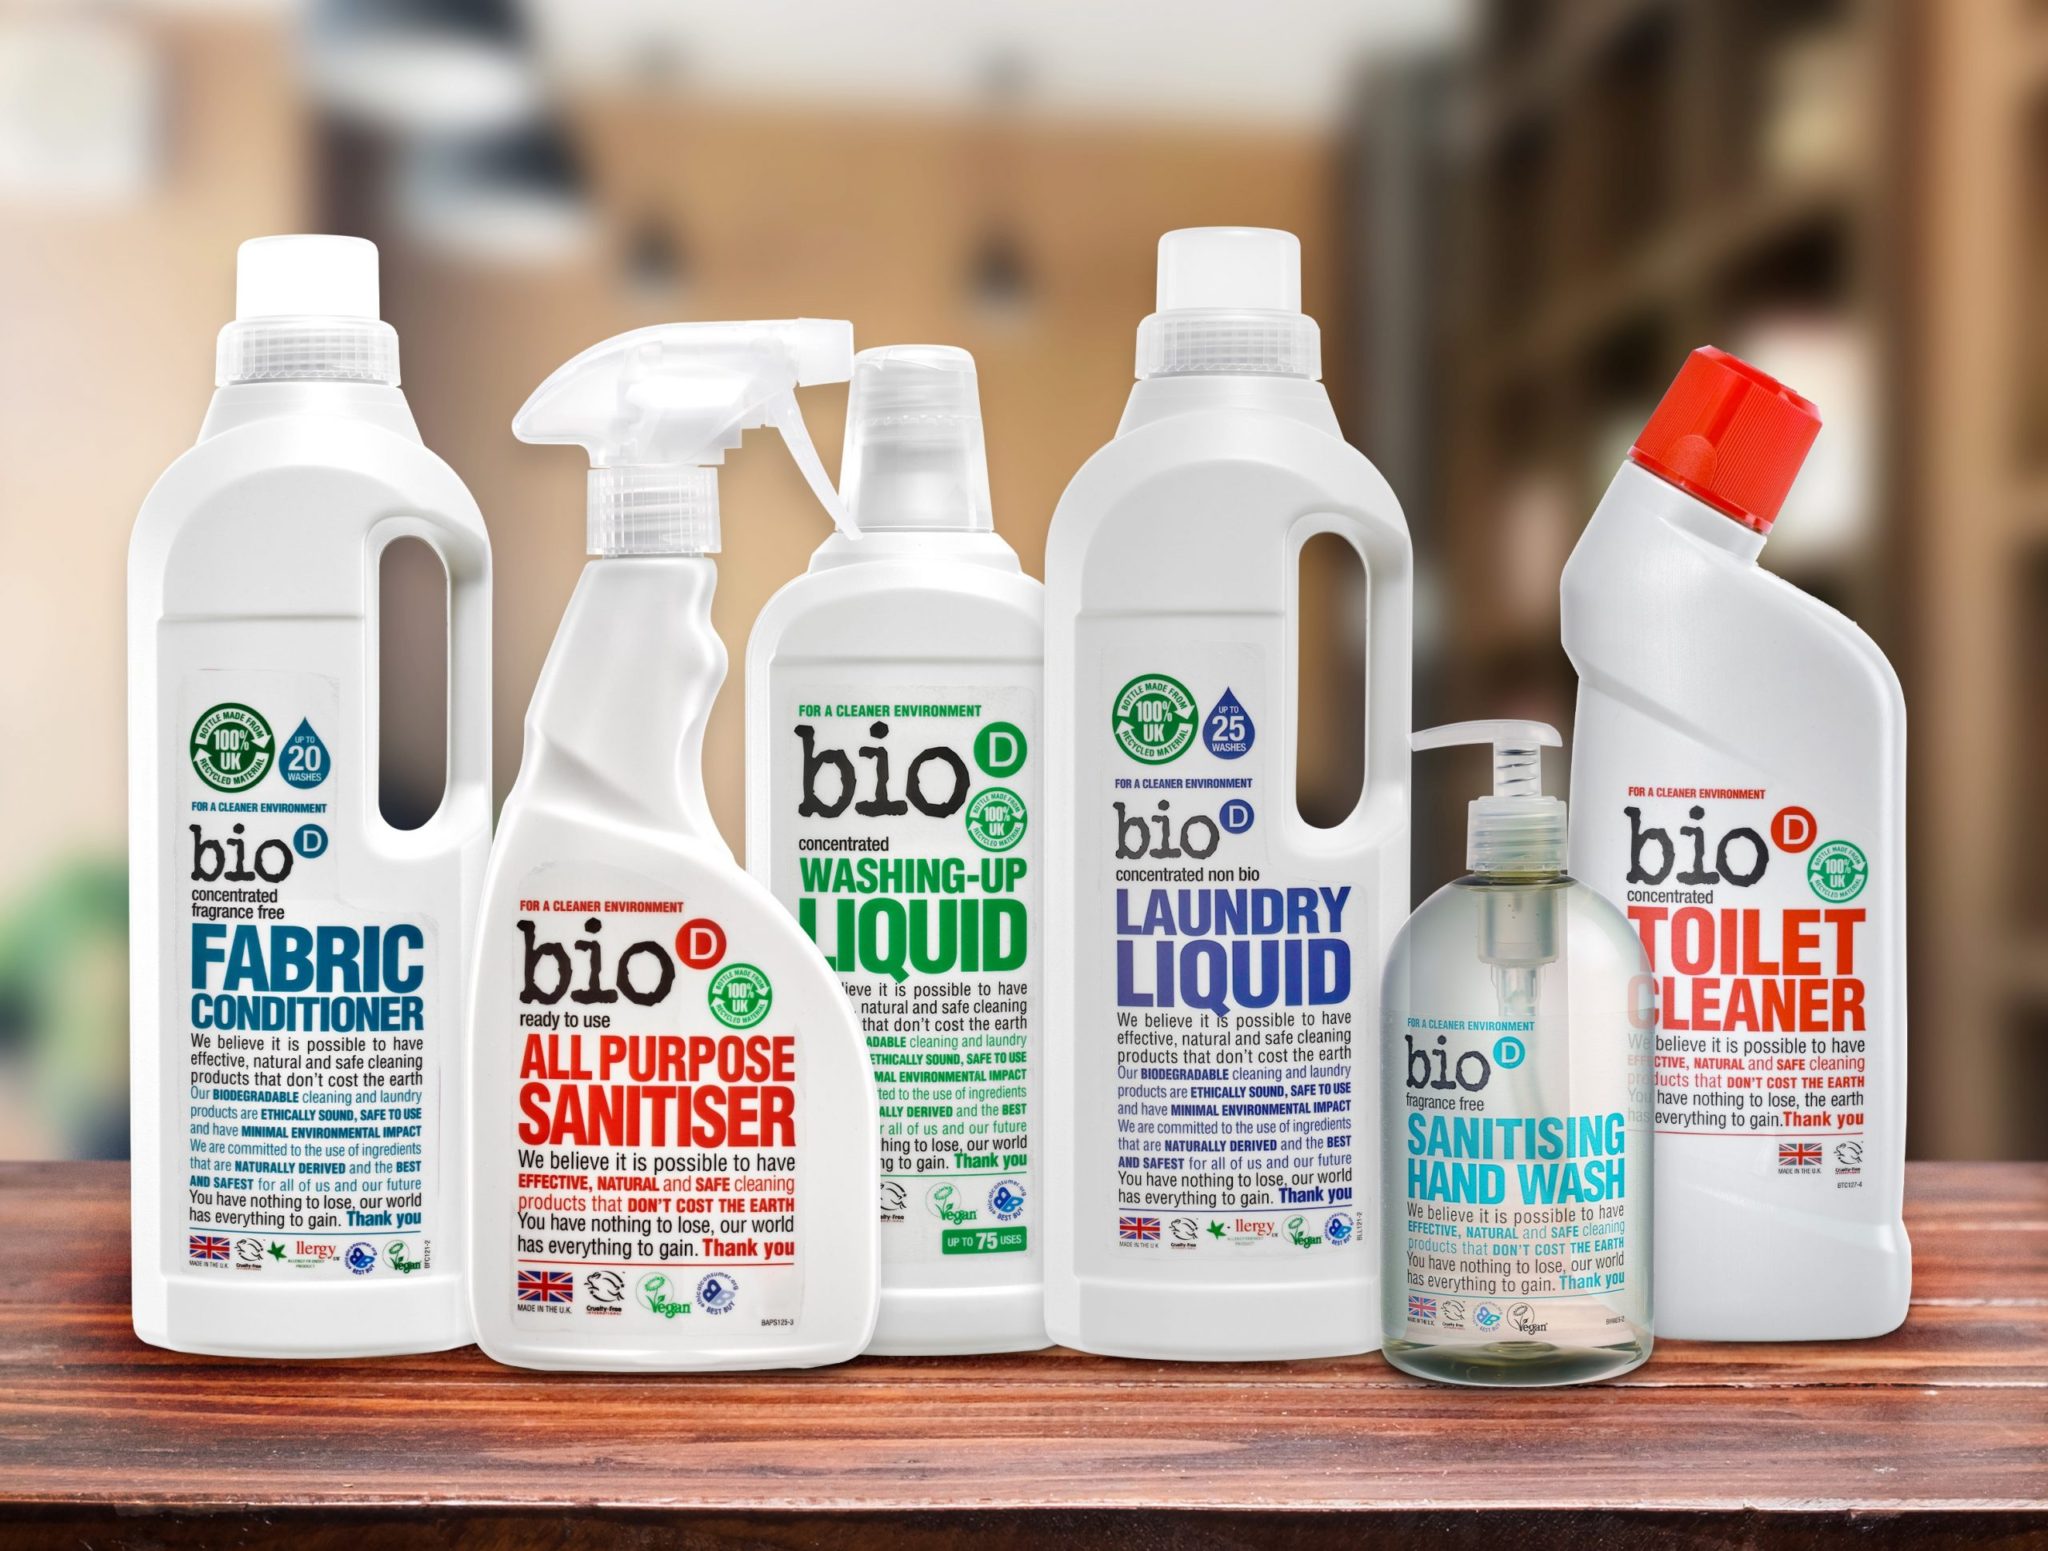 Friendly products. Eco friendly product. Use Eco-friendly Cleaning products.